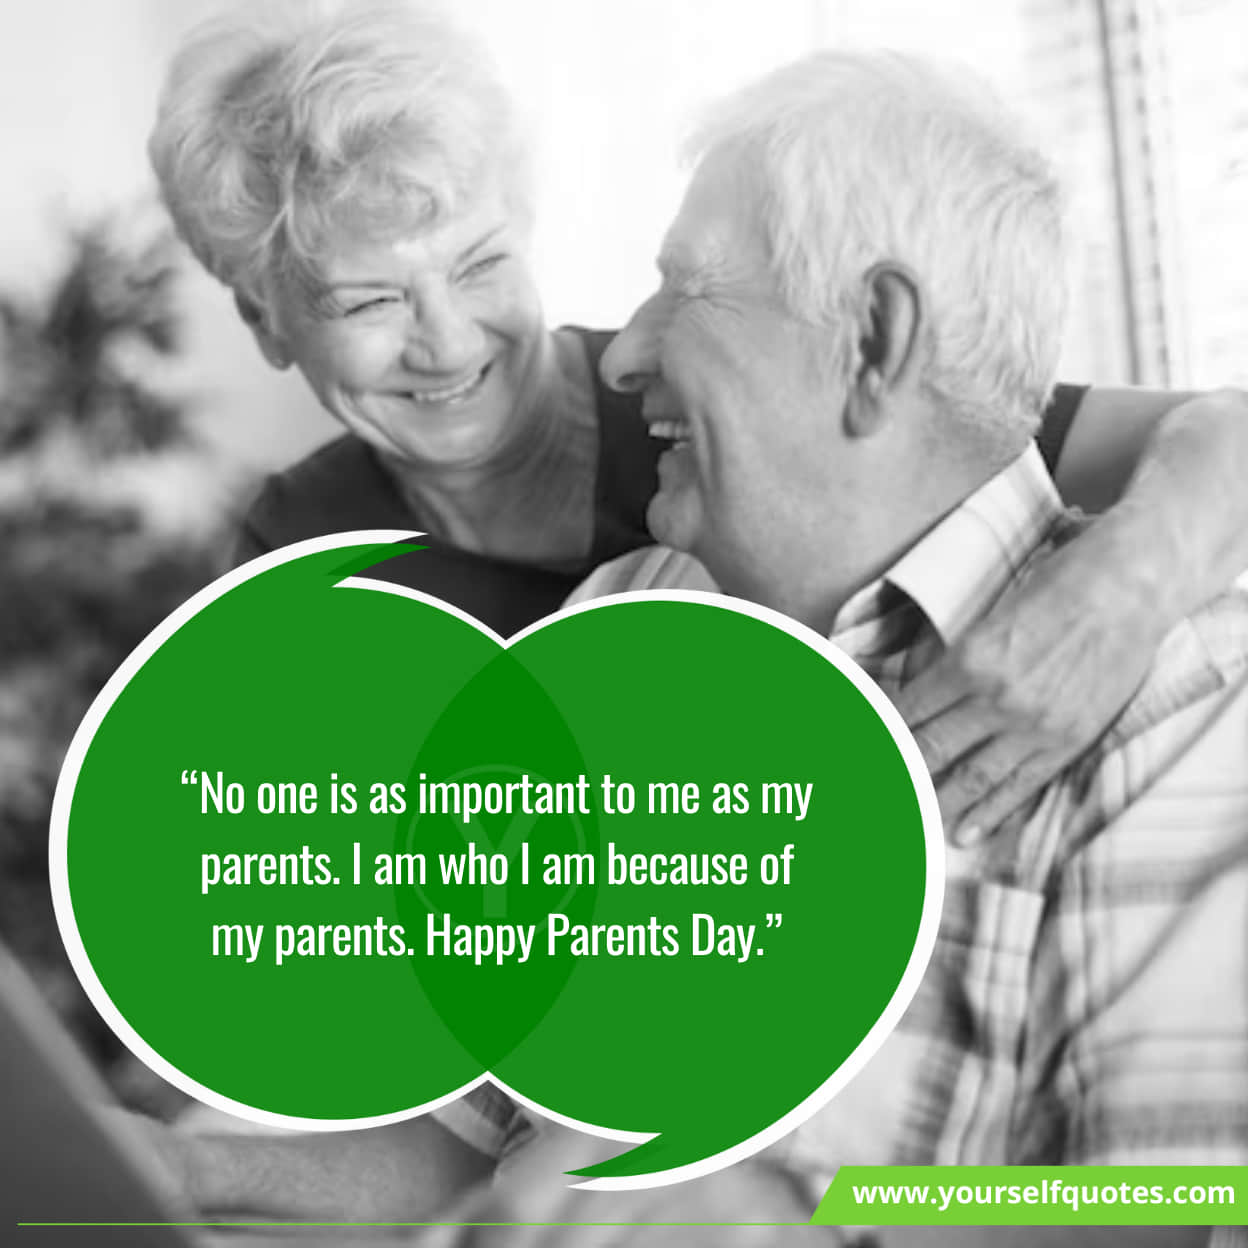 Parents Day quotes to honor mom and dad